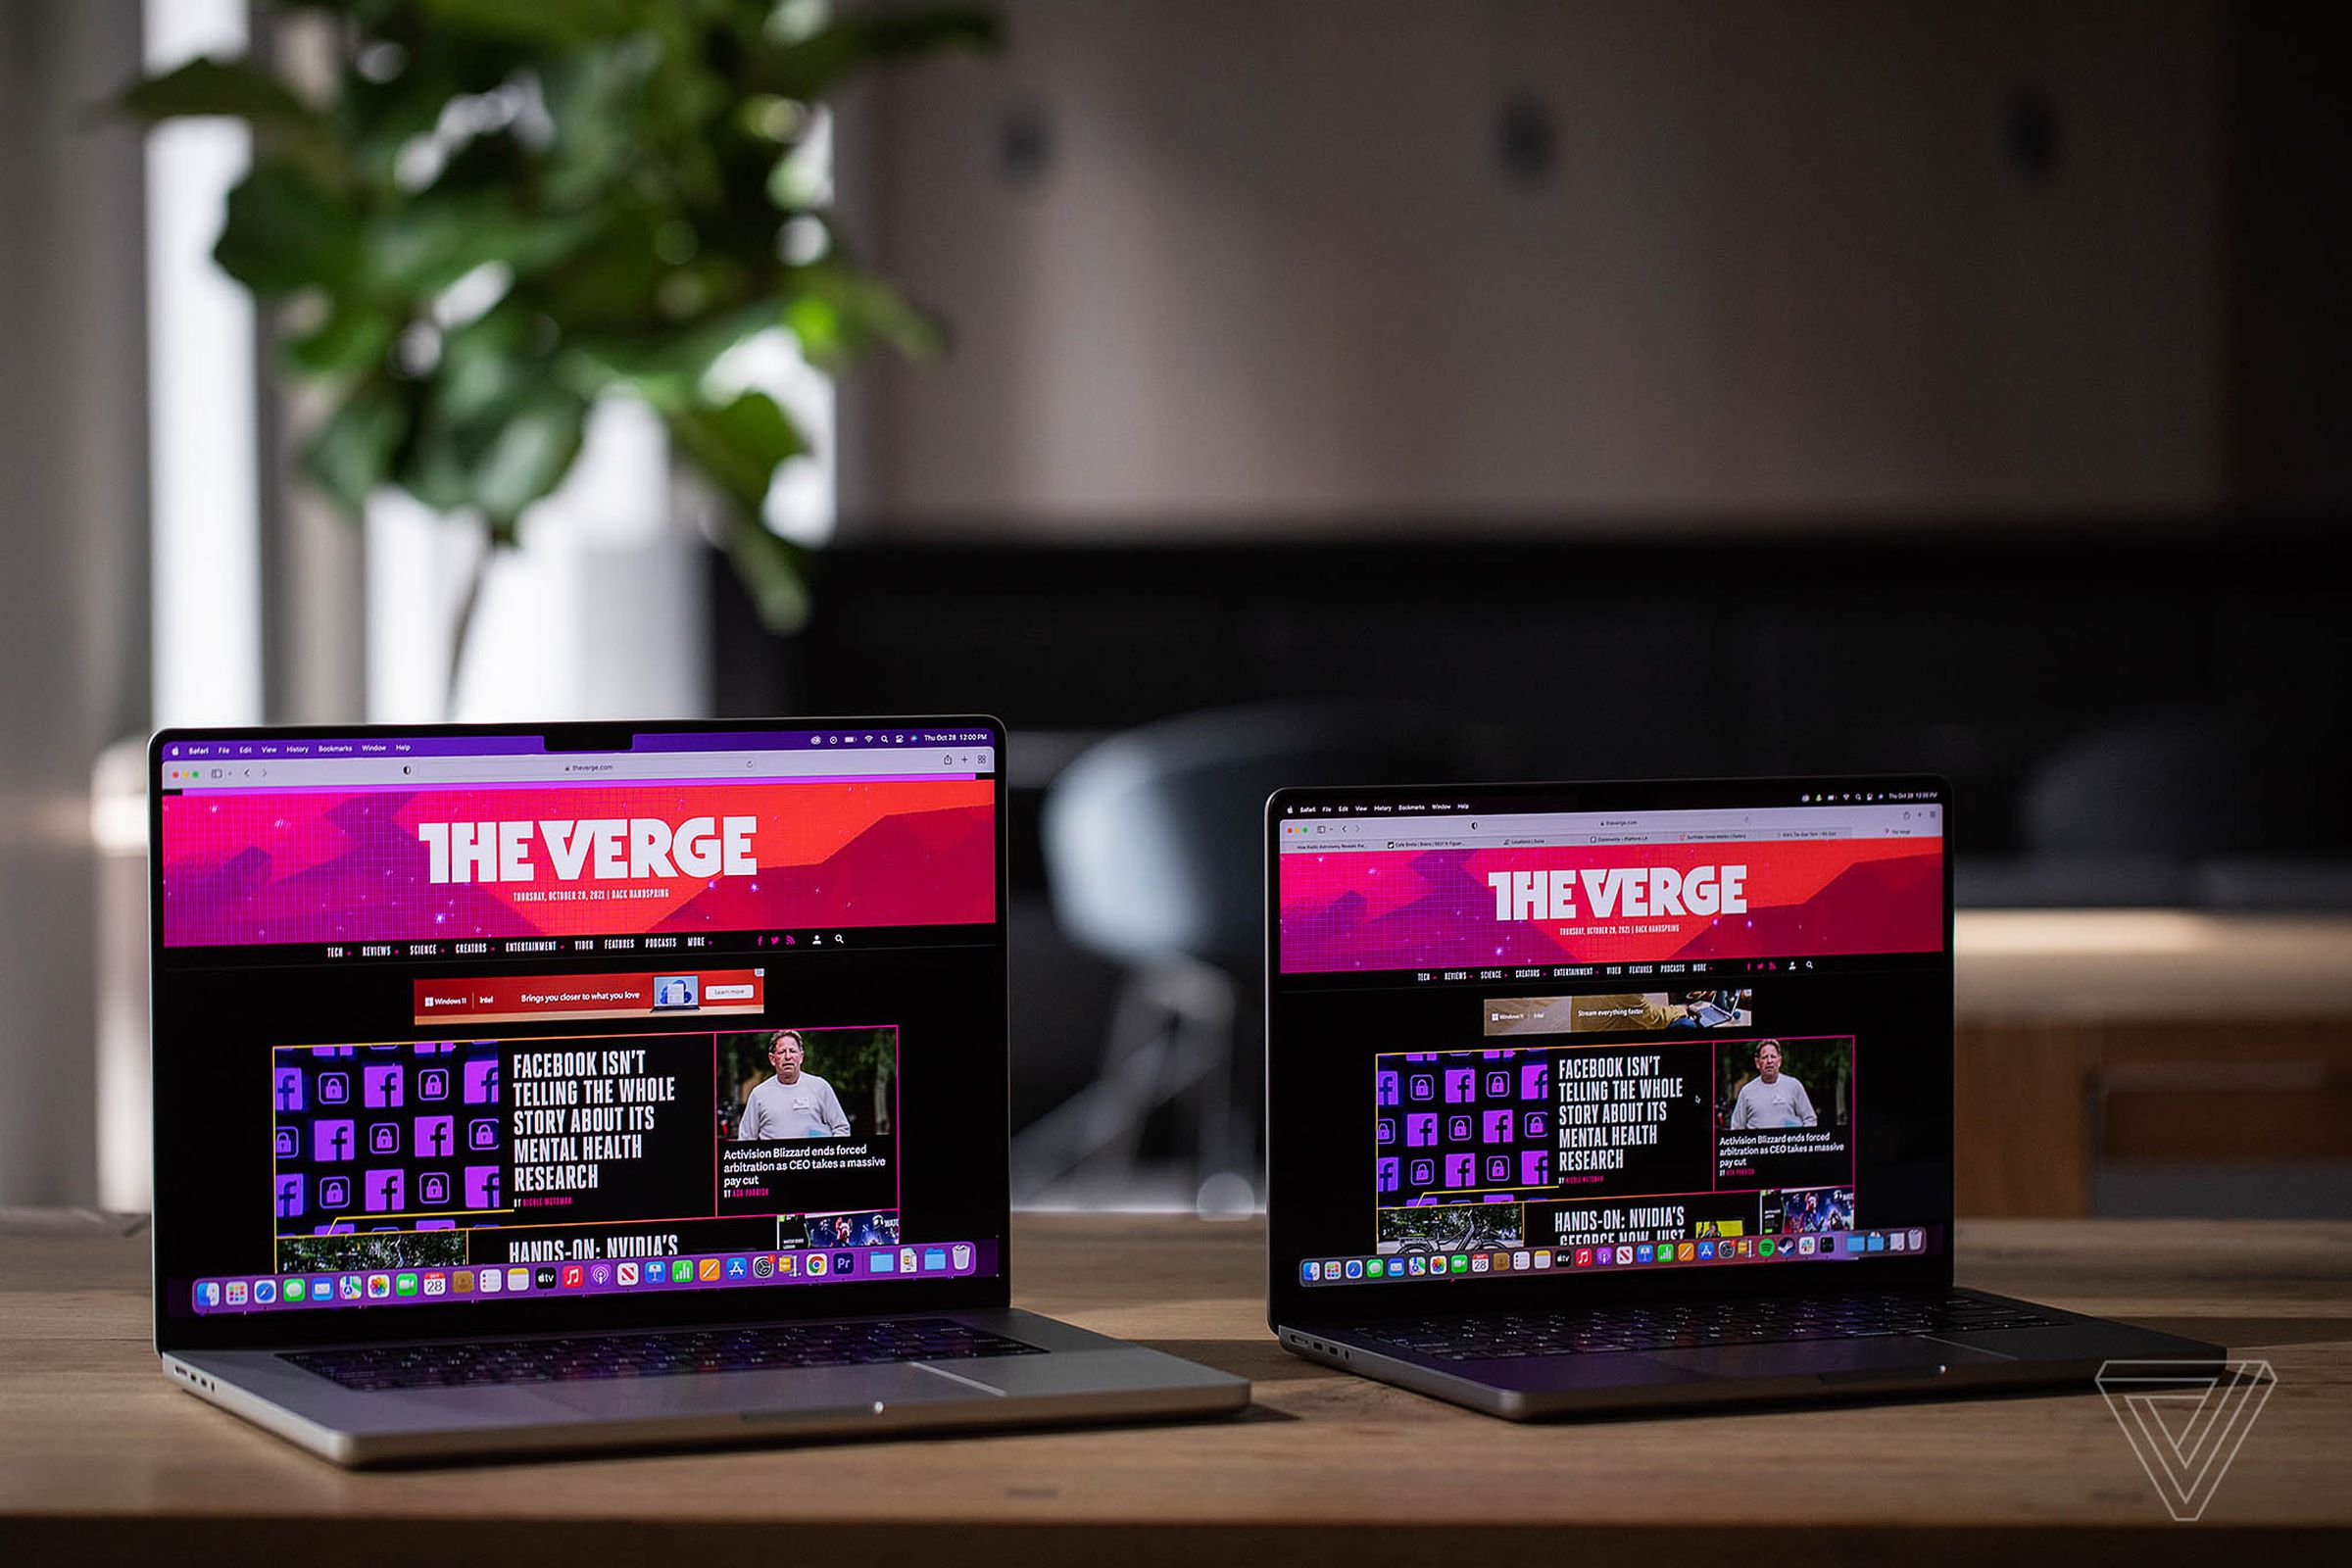 Check out discounts on MacBook Pros and other awesome tech